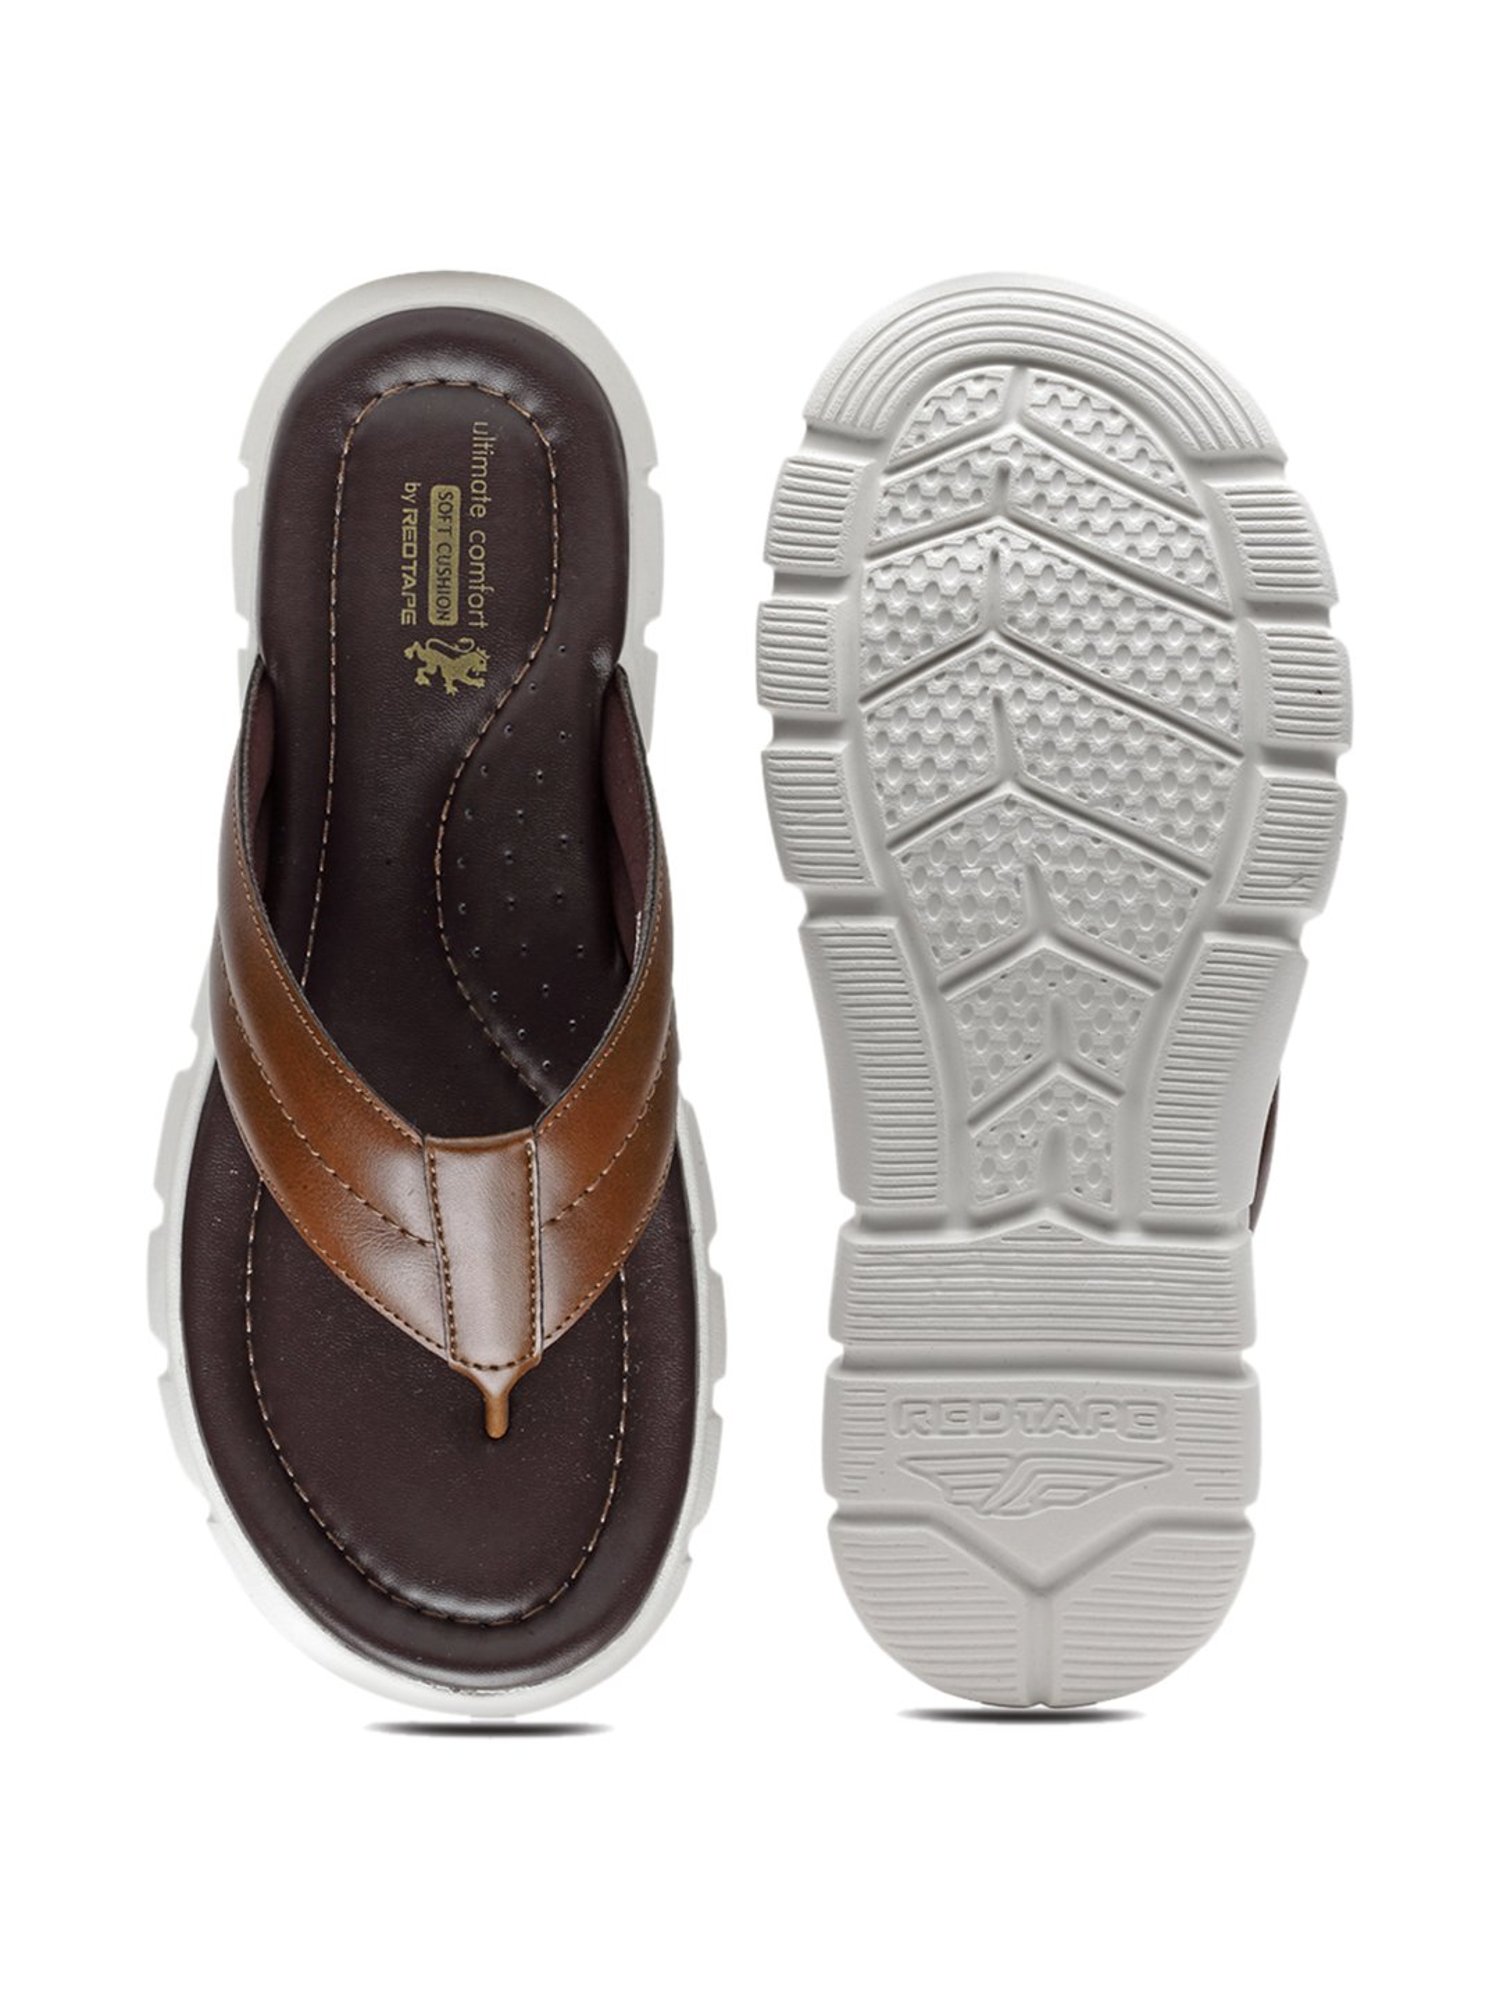 Buy RED TAPE Mens Leather Velcro Closure Sandals | Shoppers Stop